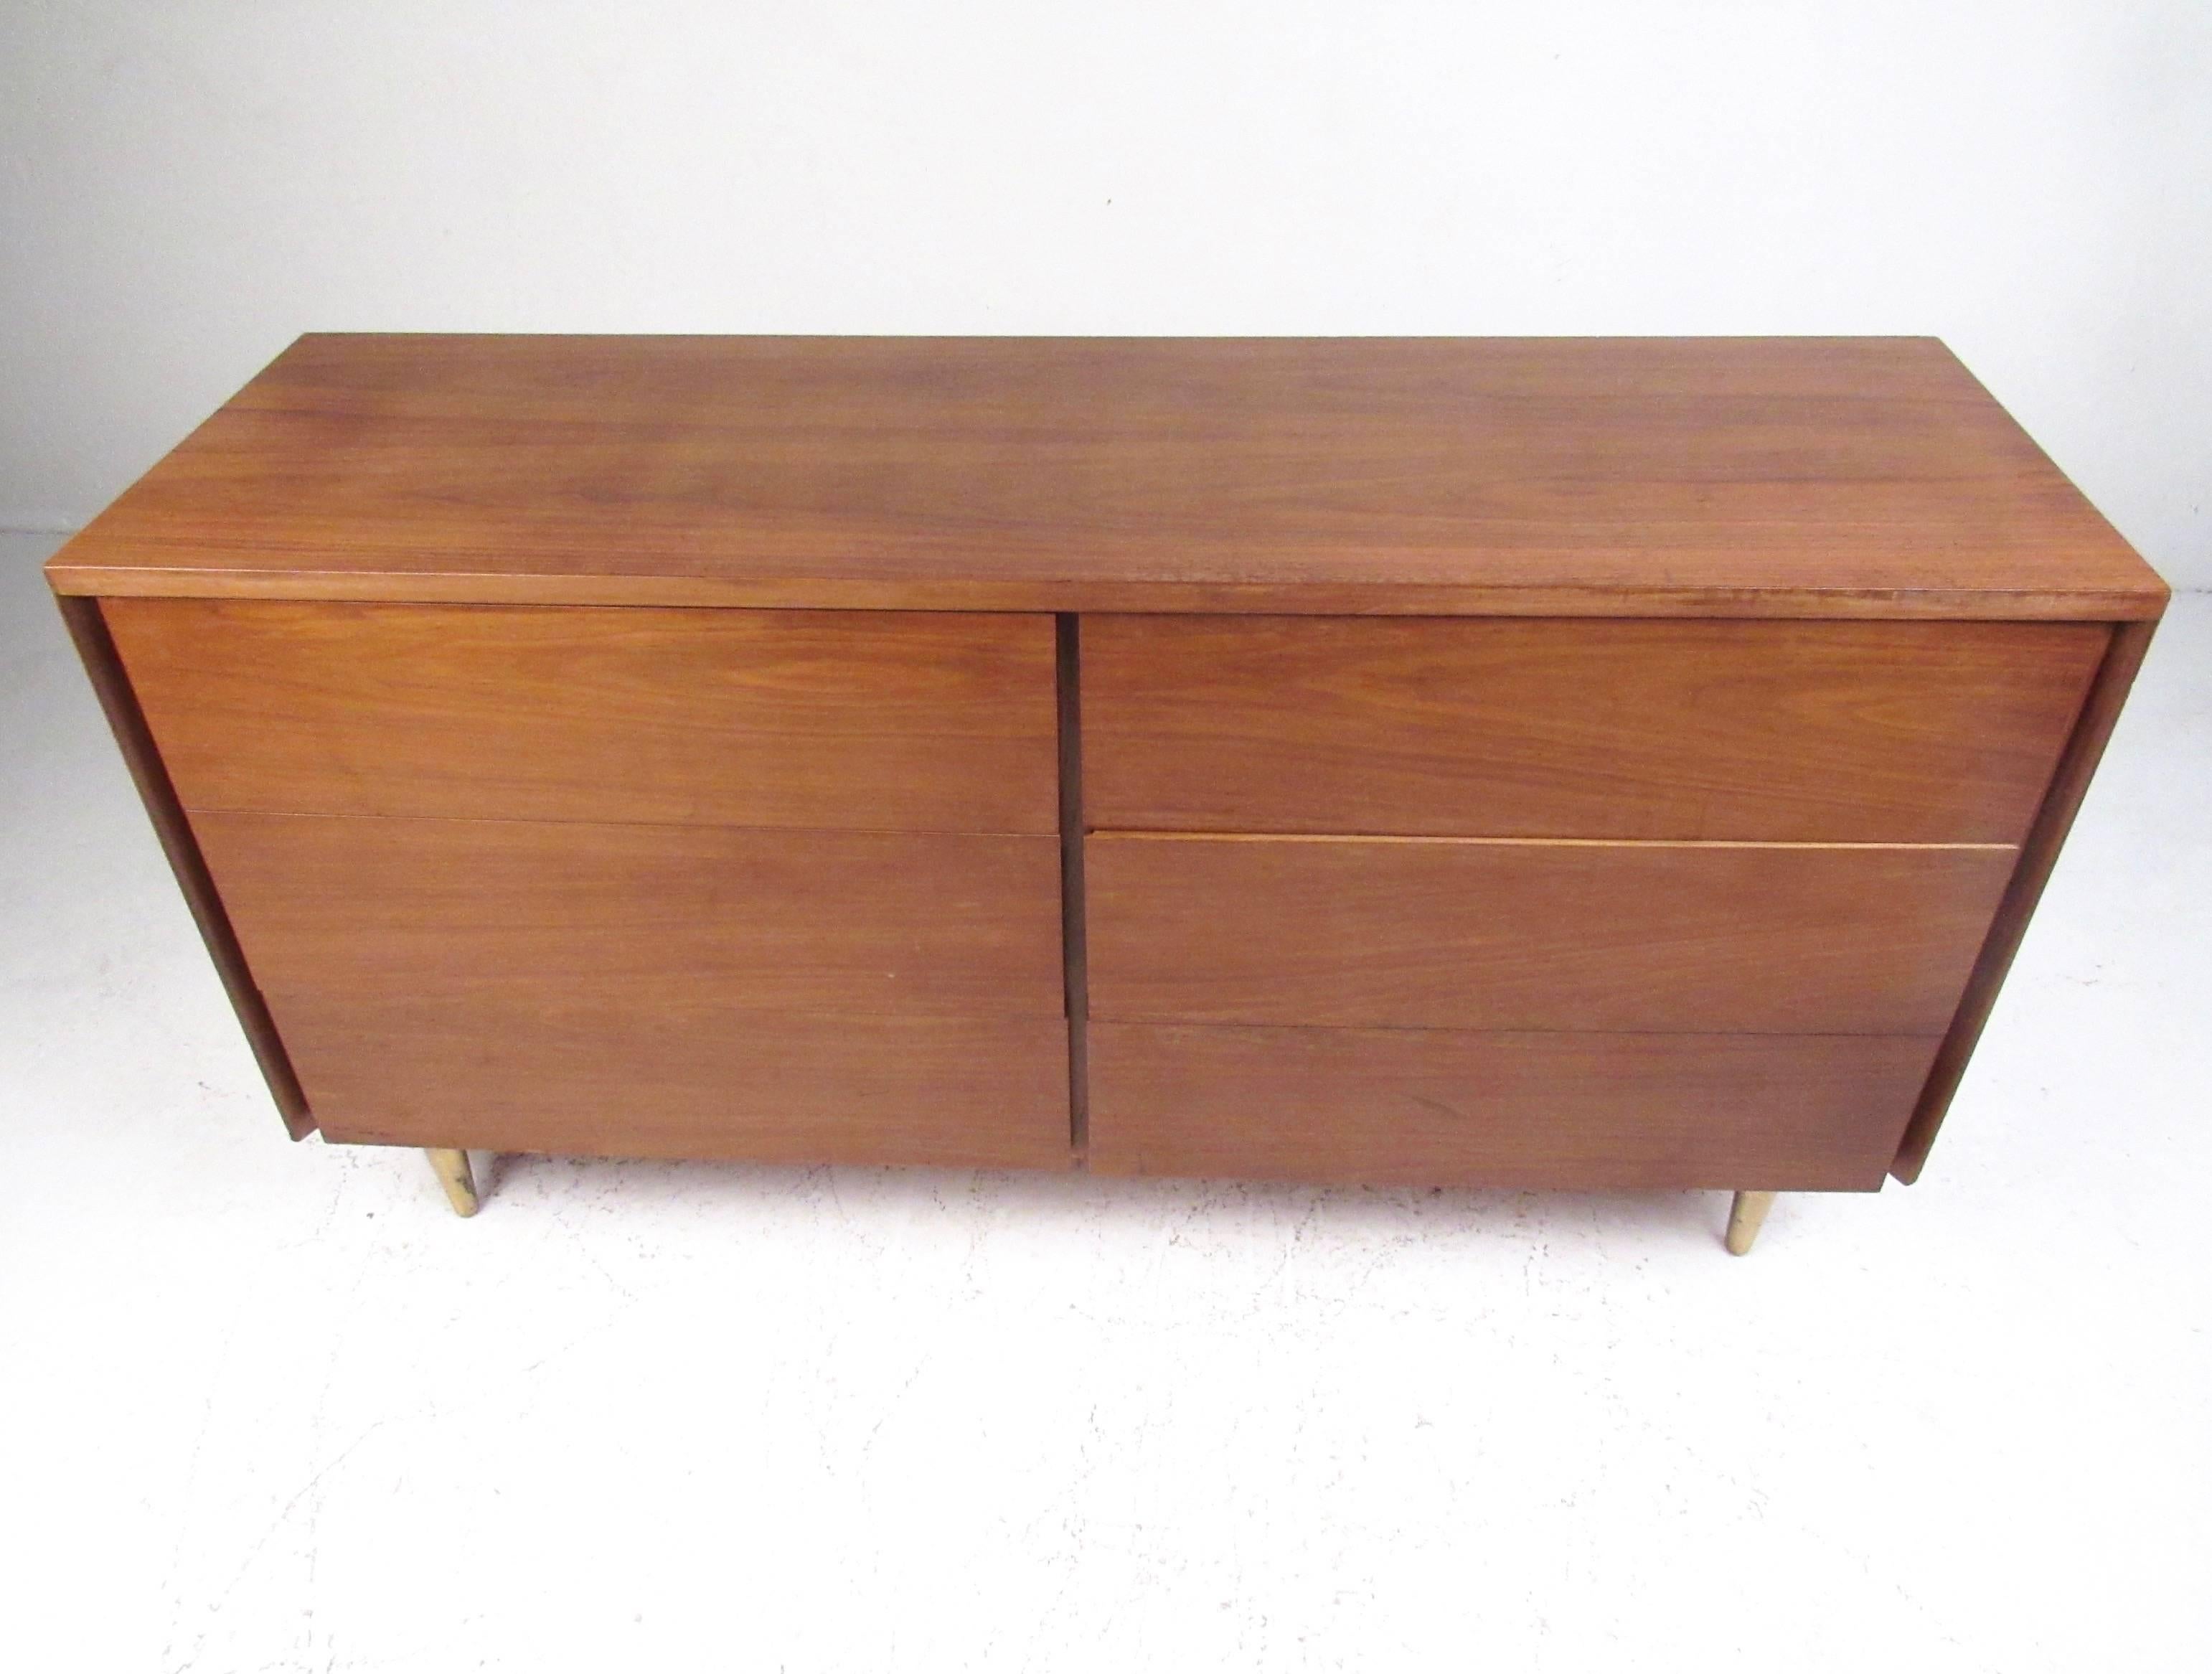 This stylish vintage modern dresser features six spacious drawers with rich hardwood finish and tapered brass legs. Manufactured by John Stuart, this midcentury bedroom dresser makes as striking addition in any setting. Please confirm item location